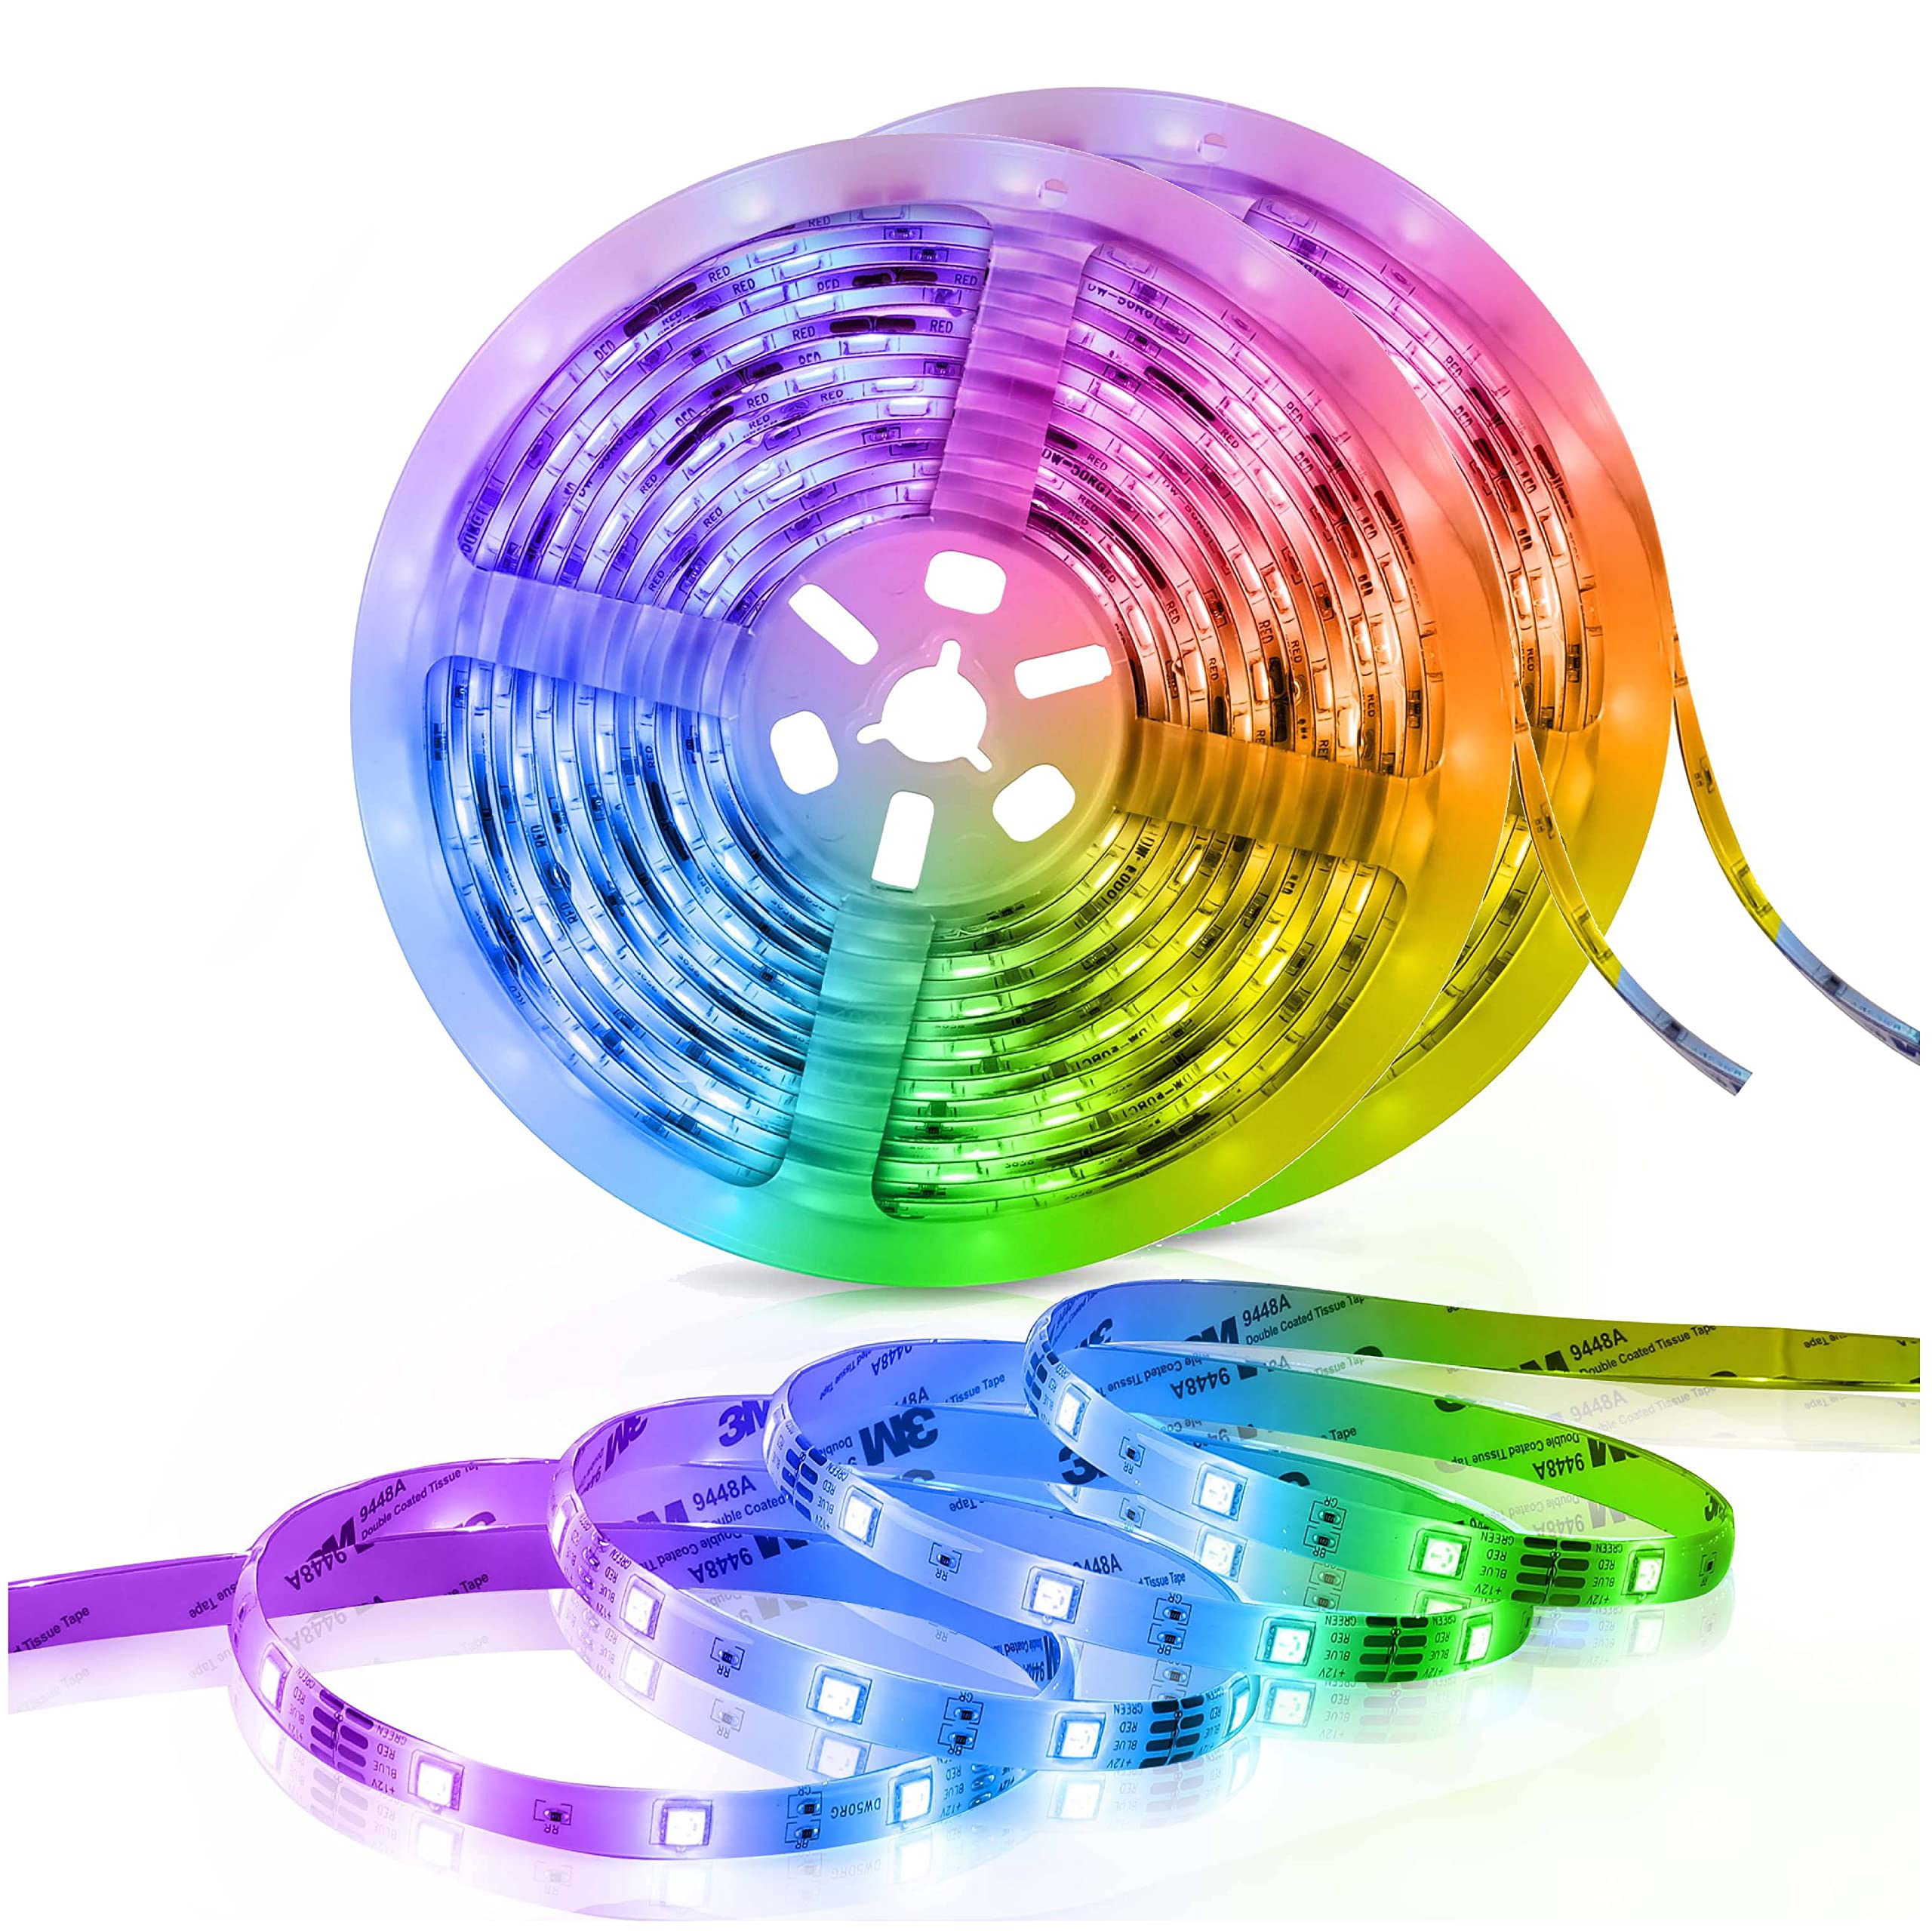 Homm by BlupebbleLumina Smart RGB LED Lights Strips 16M Colors, Led Color Changing, Smart App Control, Easy Install, Compatible W/Alexa & Google Assistant, Ip65 Rating Water-proof (5 Meters)